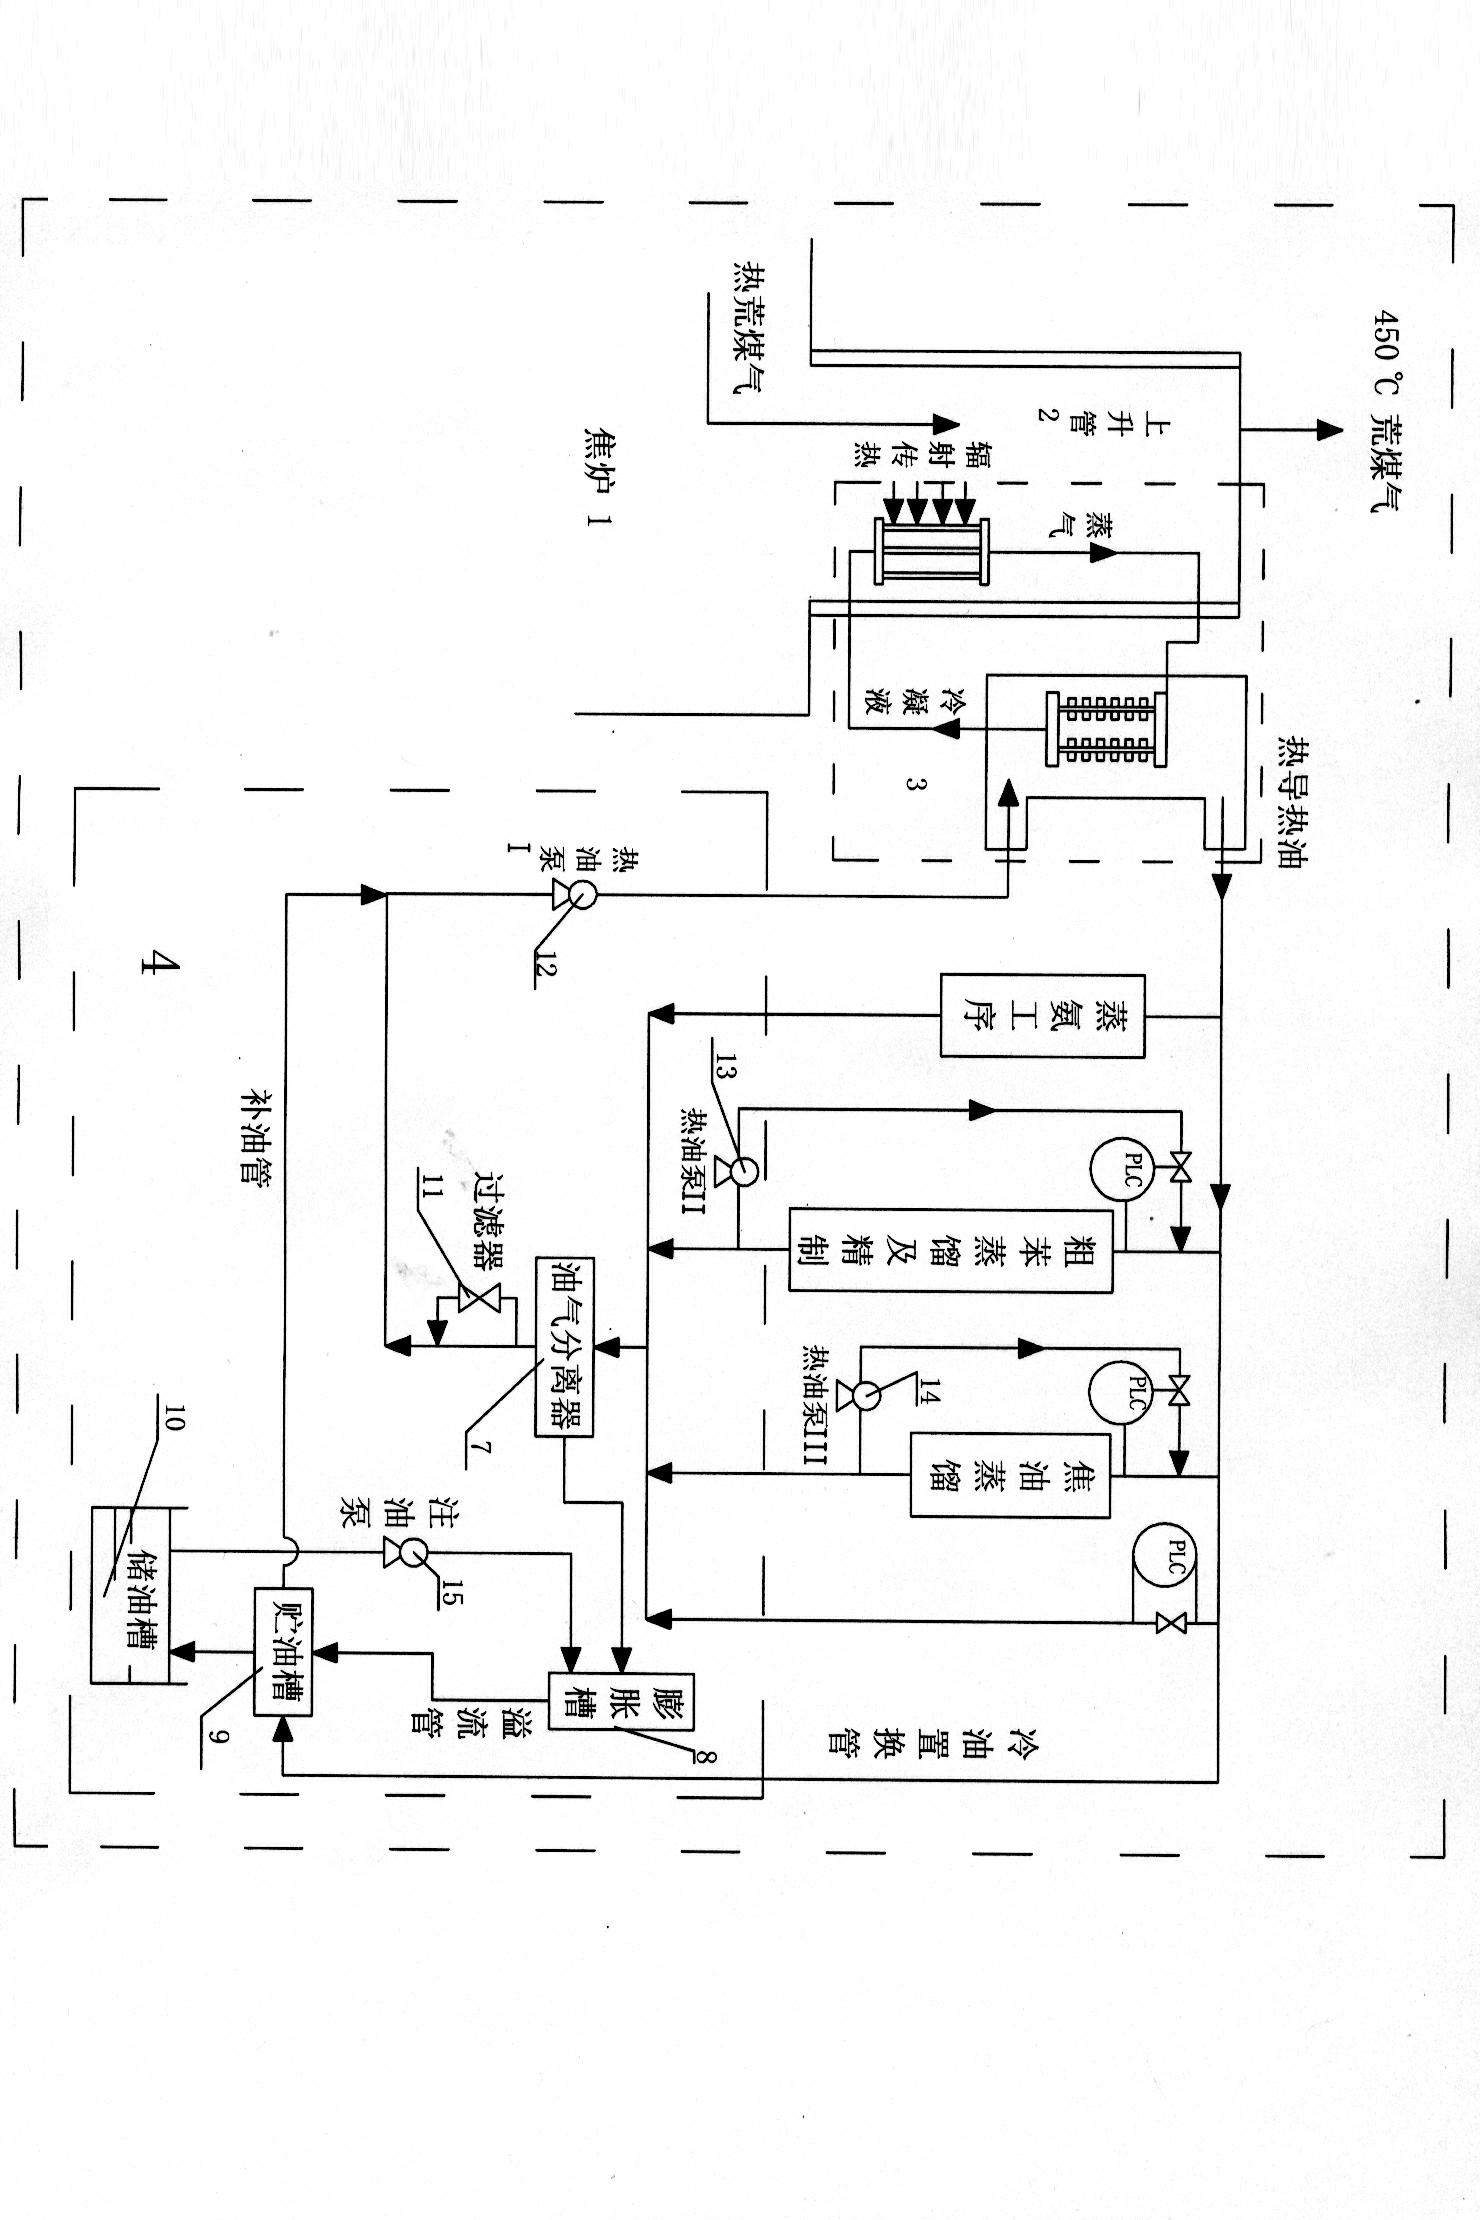 Integrated technique and special equipment for raw gas waste heat recovery and steam replacement with heat transfer soil